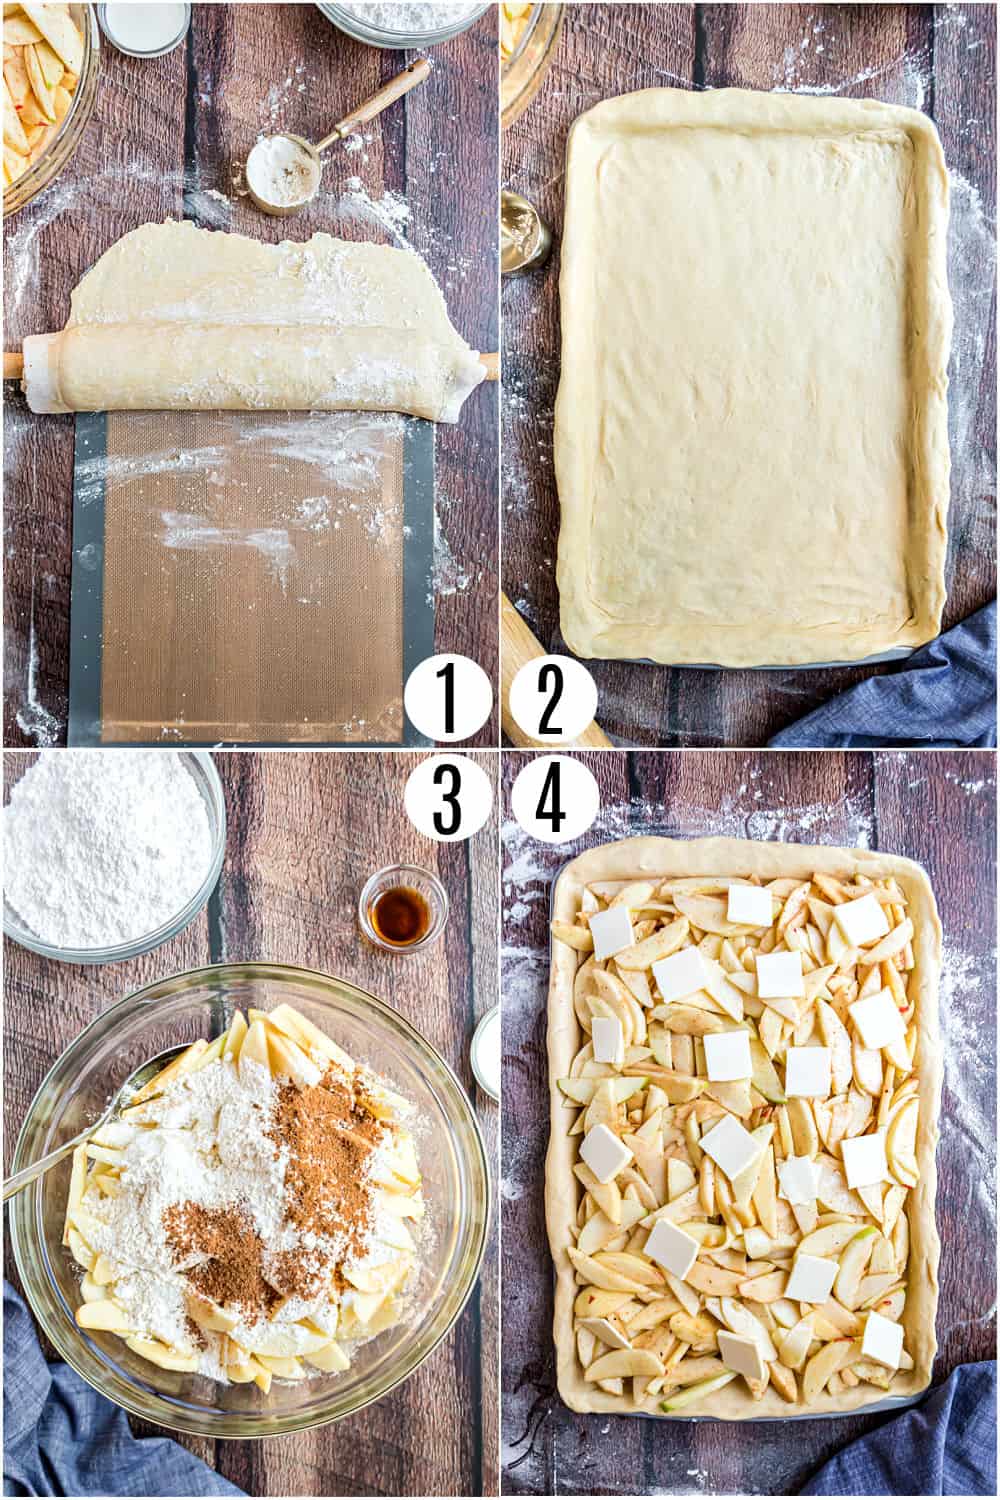 Step by step photos showing how to assemble apple slab pie with double crust.